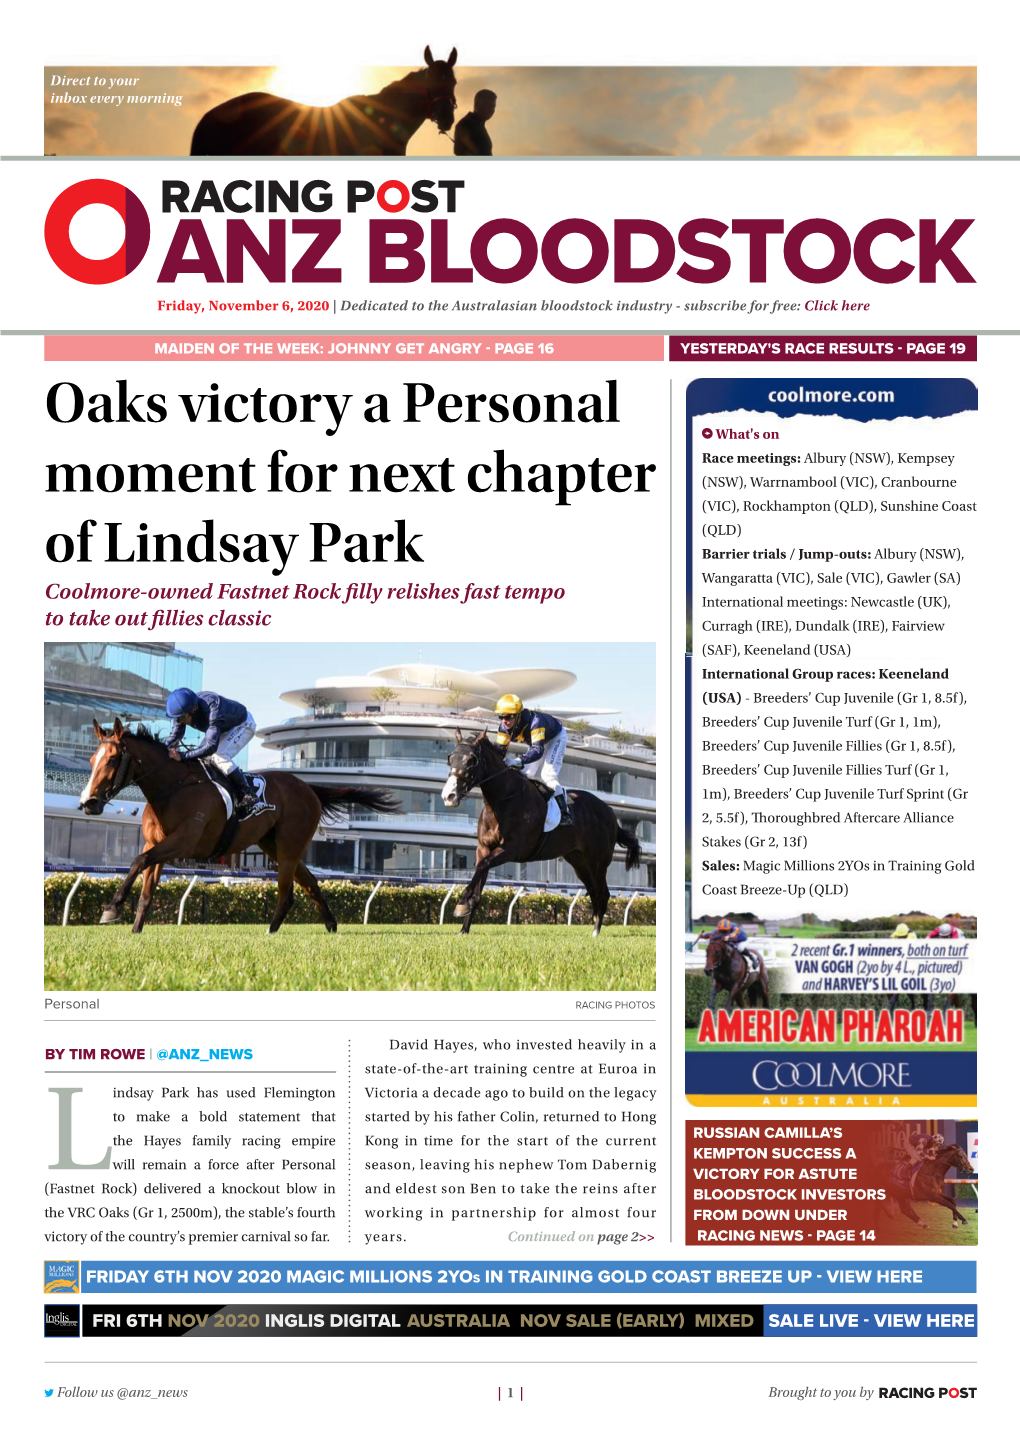 Oaks Victory a Personal Moment for Next Chapter of Lindsay Park | 2 | Friday, November 6, 2020